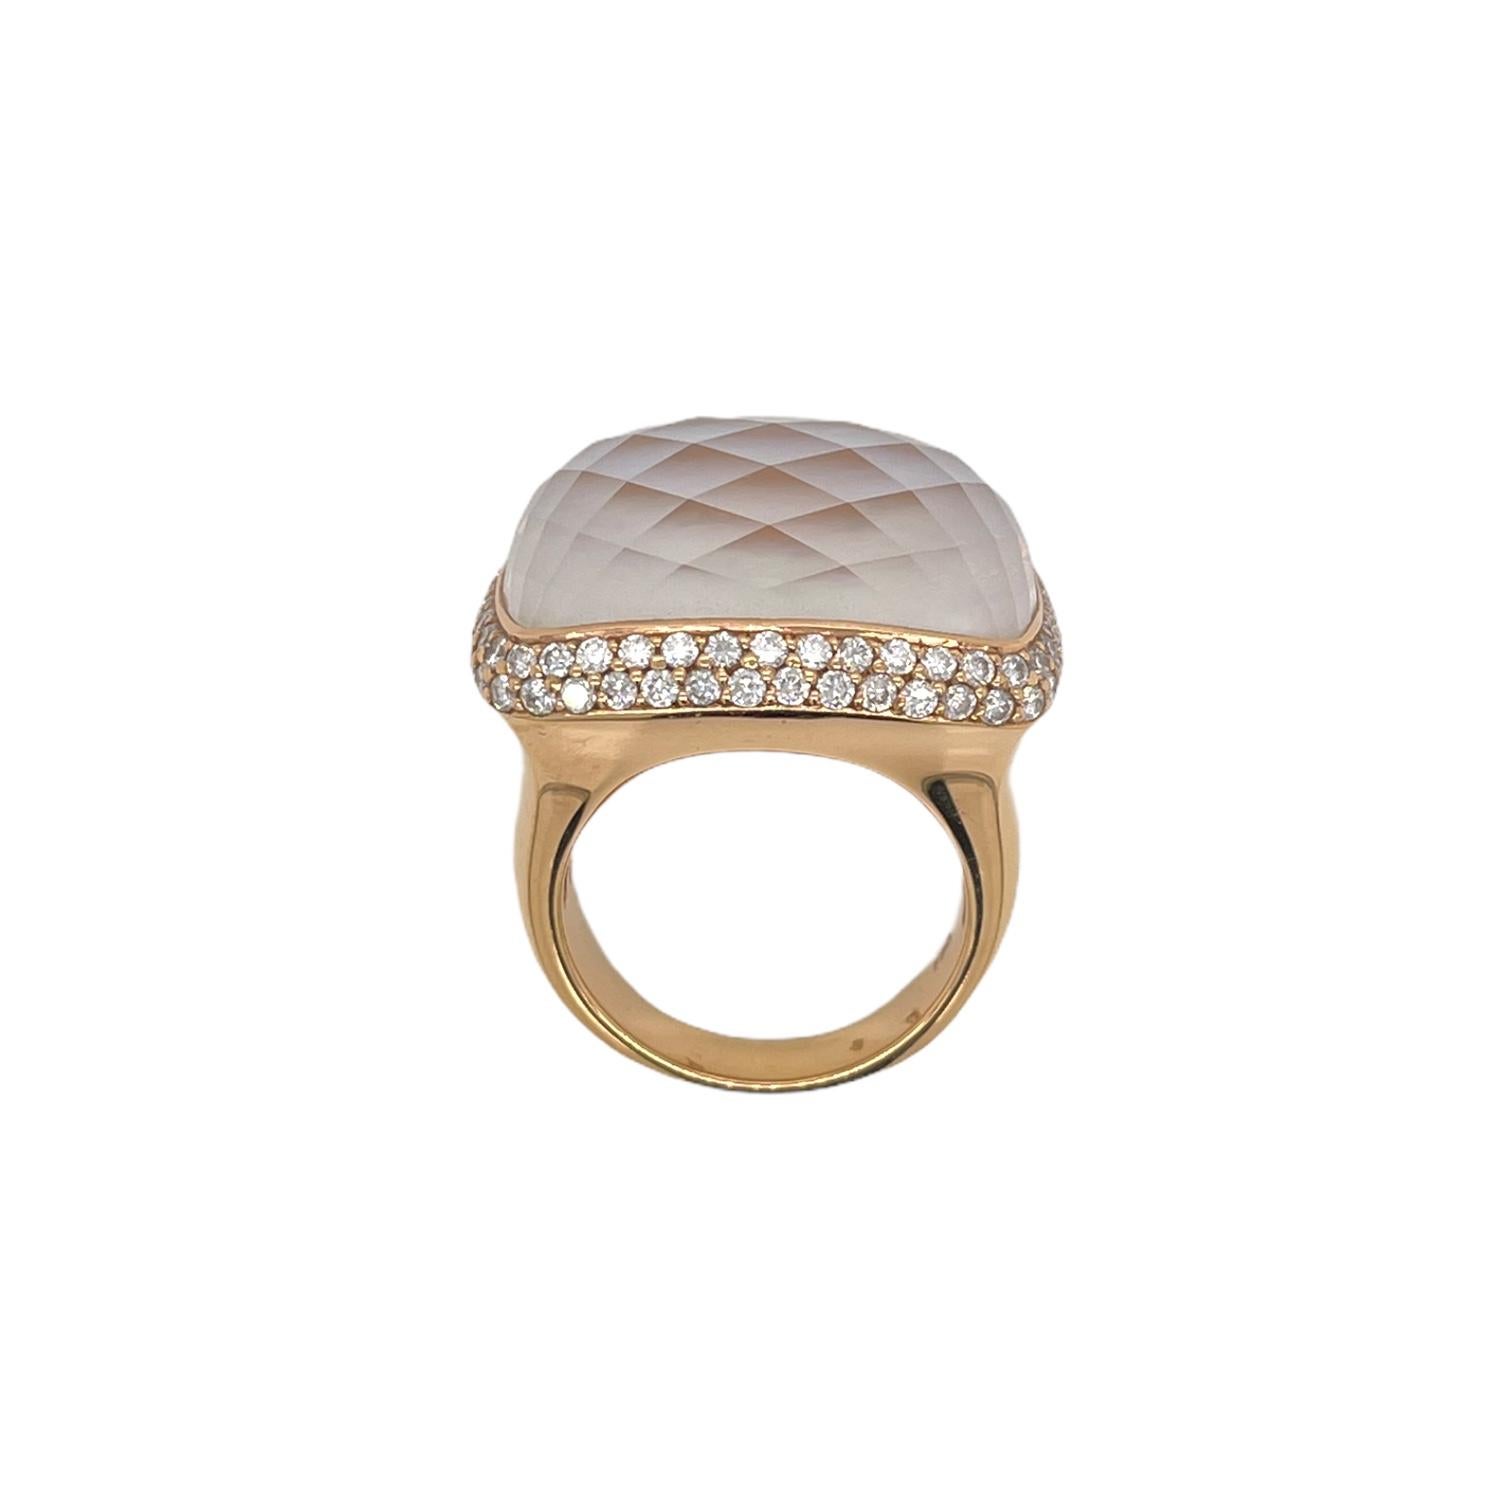 One of a kind large checkerboard cut mother of pearl and quartz ring in 18k yellow gold. Ring contains 1 center rectangular shape checkerboard cut mother of pearl and quartz gemstone, 4.58ct. Gemstone is accented by round brilliant diamond, 1.35tcw.